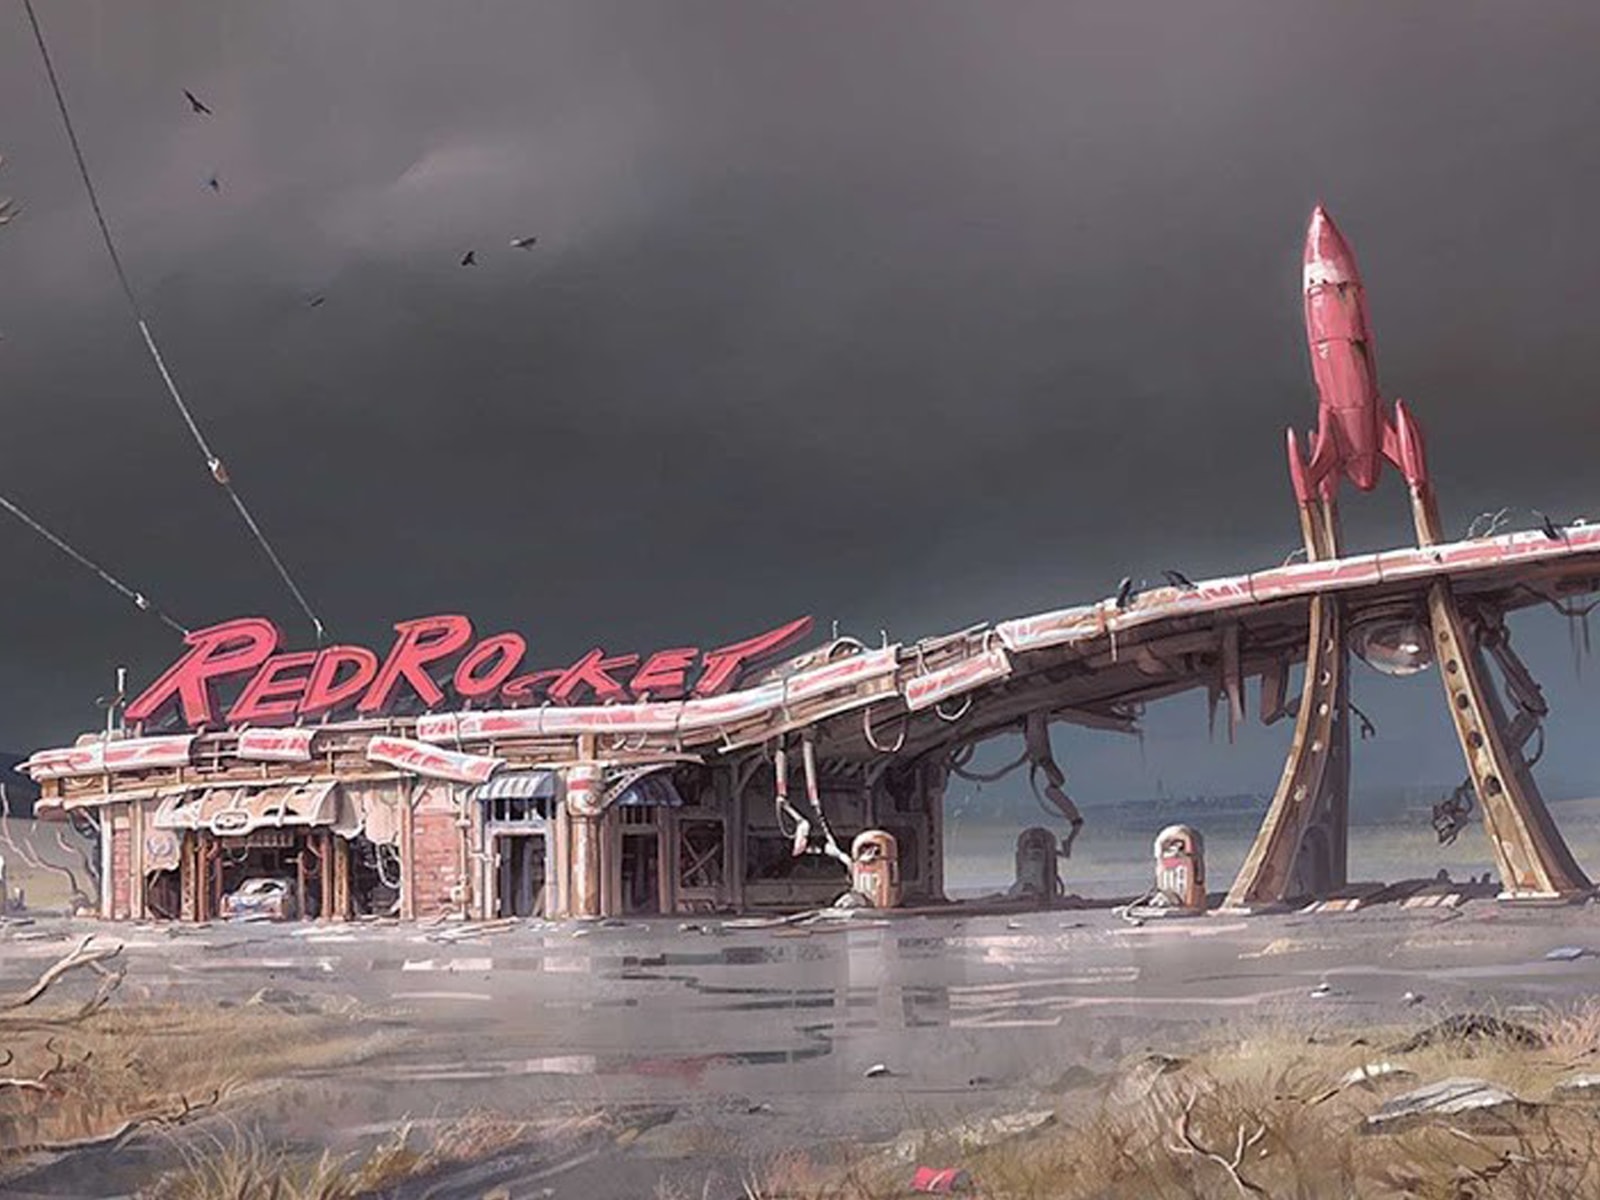 Illustration of the Red Rocket gas station in the post-apocalyptic wasteland of Fallout 4 by DigiPen grad Ilya Nazarov